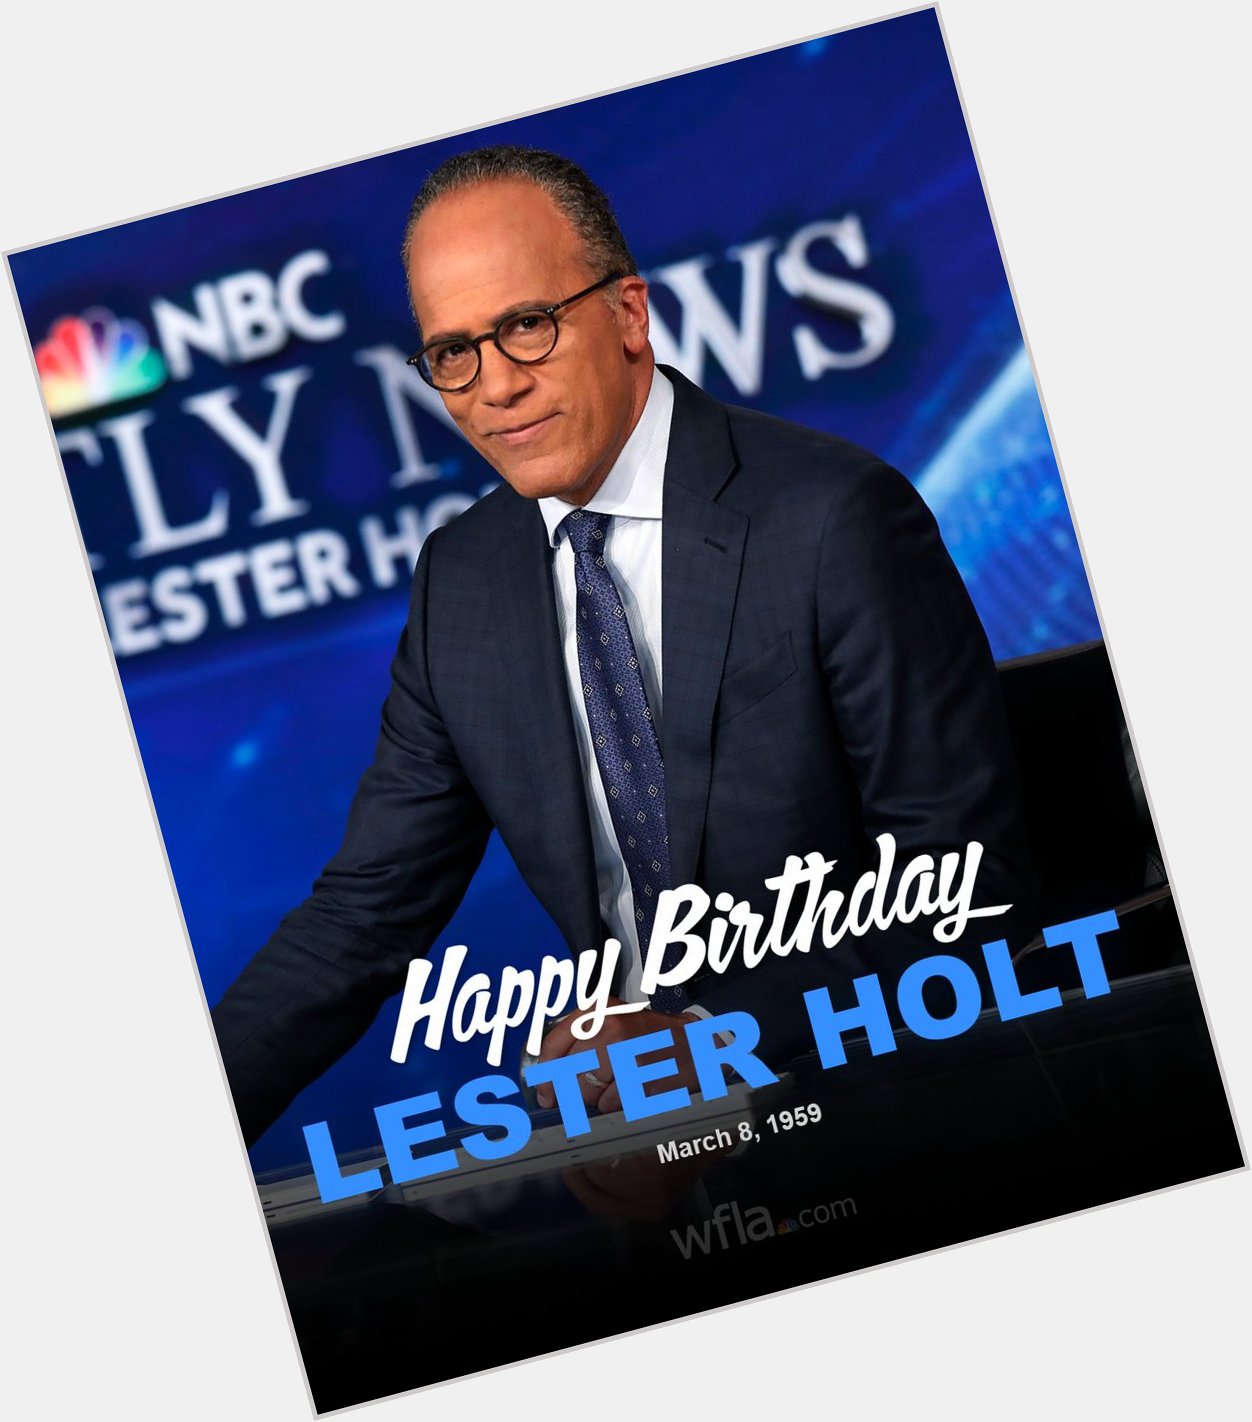 HAPPY BIRTHDAY, LESTER HOLT! The NBC Nightly News & Dateline NBC anchor turns 64 today.  